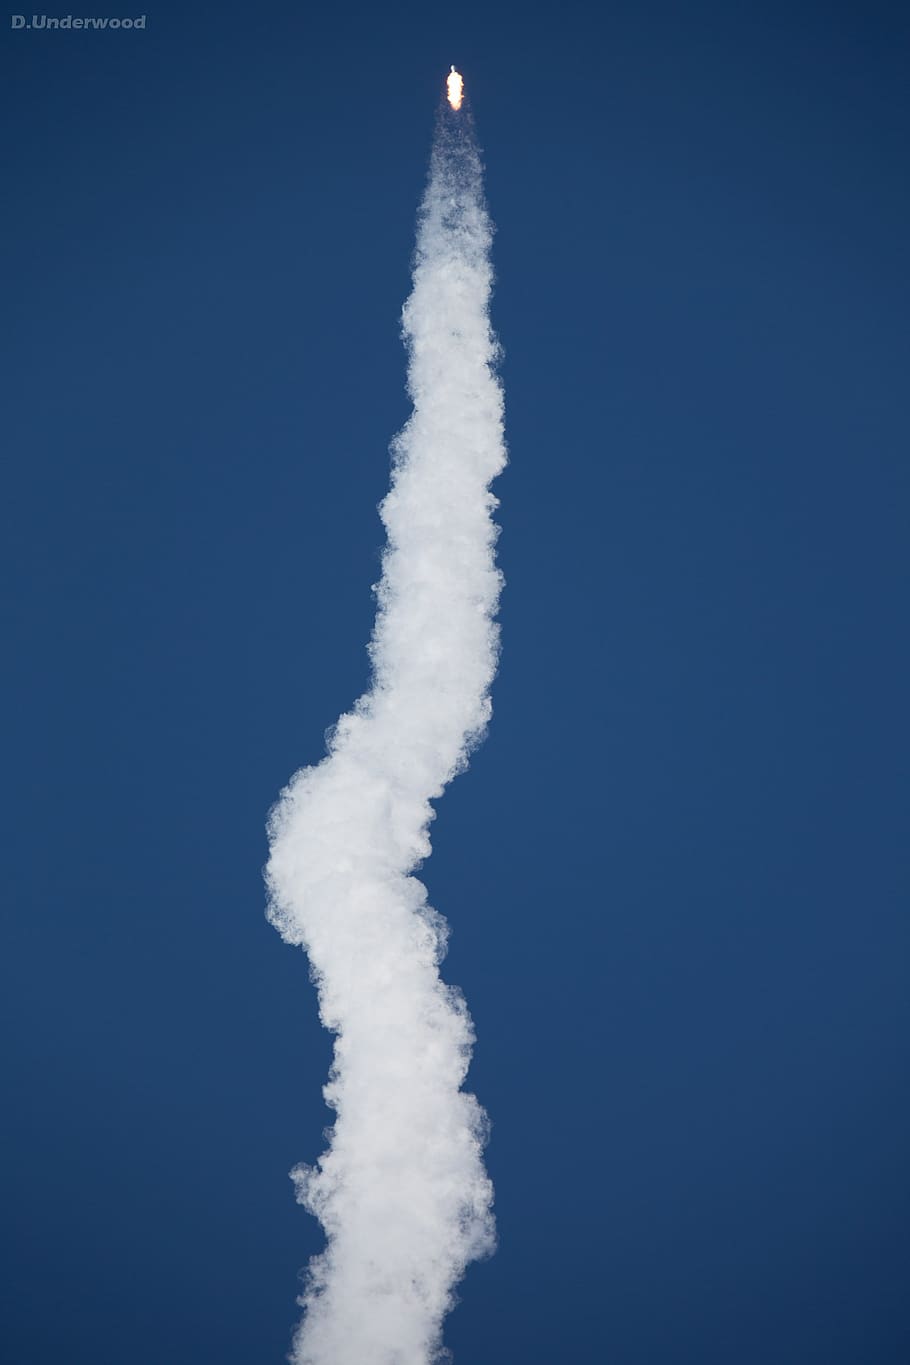 rocket launch, steam, smoke, trail, contrails, chemtrails, trajectory, spacex, lift-off, launch